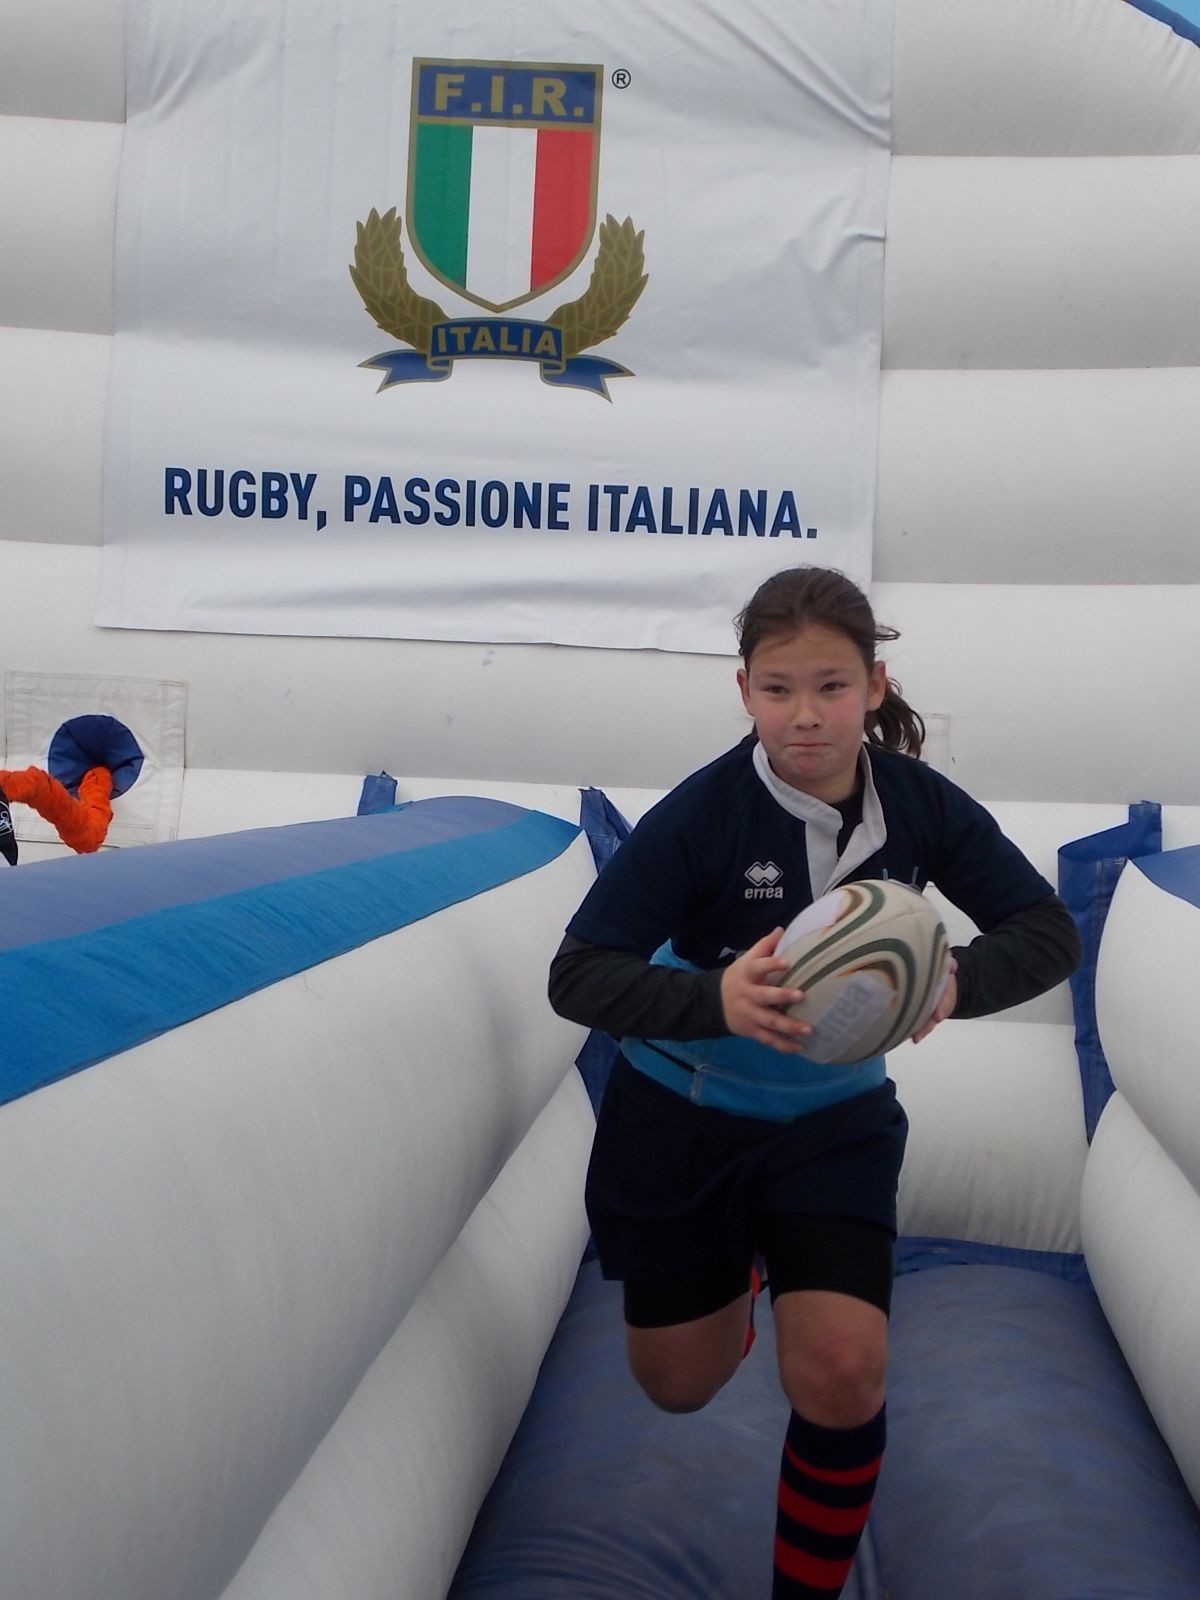 gonfiabile gioco rugby, gonfiabile gioco rugby produzione, gonfiabile gioco rugby prezzo, gonfiabile gioco rugby noleggio, bungee rugby, attivit&#224; rugby, campo rugby gonfiabile, gioco rugby elastici, evento rugby, team building rugby